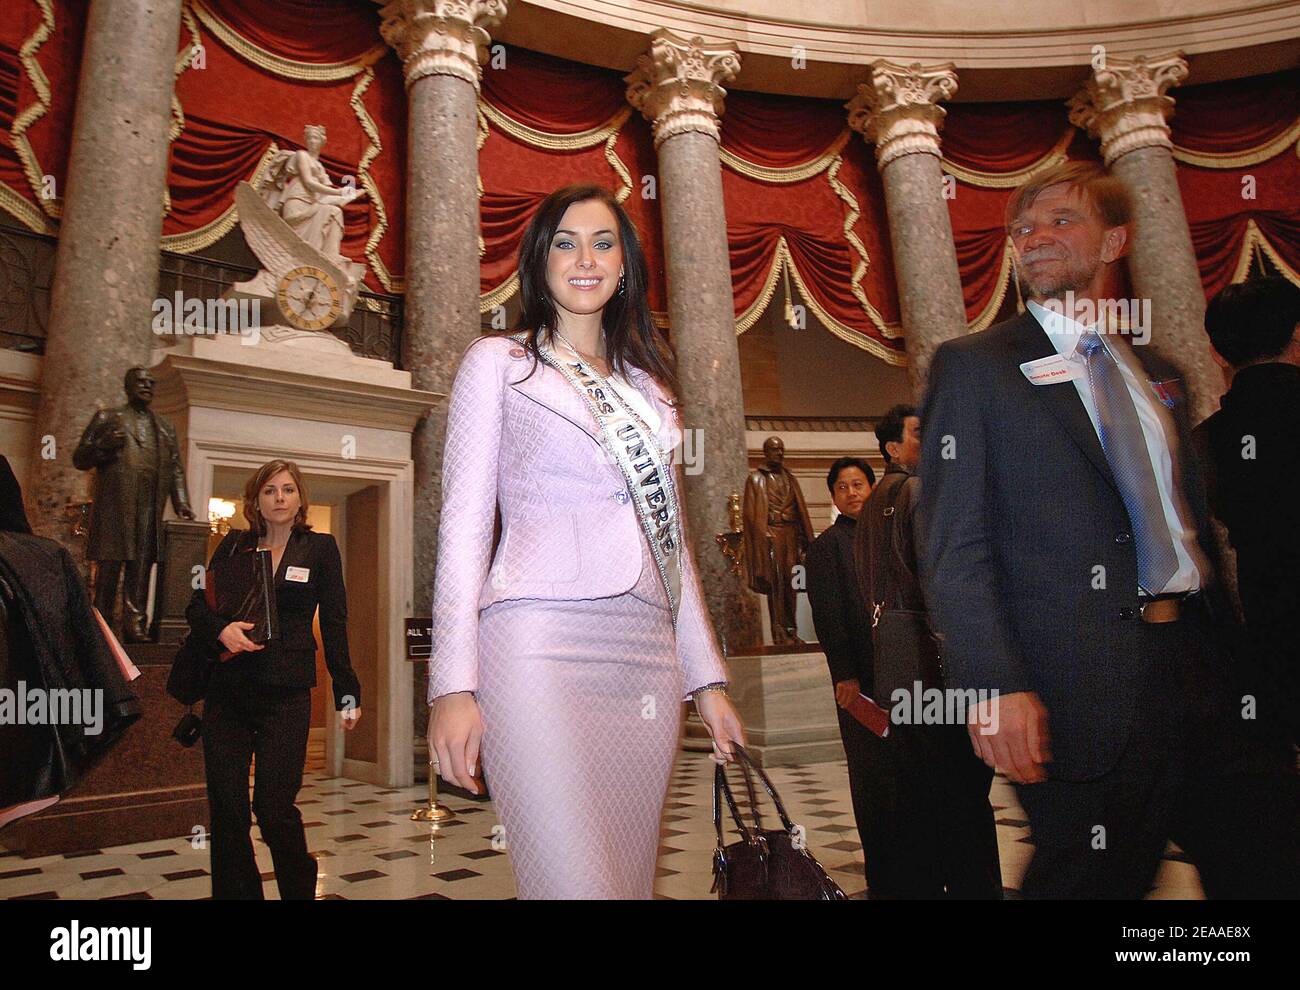 EXCLUSIVE. Miss Universe 2005 Natalie Glebova visiting Senators and Congressmen at the capitol to promotes World AIDS Day in Washington, DC on December 1, 2005. Photo by Olivier Douliery/ABACAPRESS.COM Stock Photo